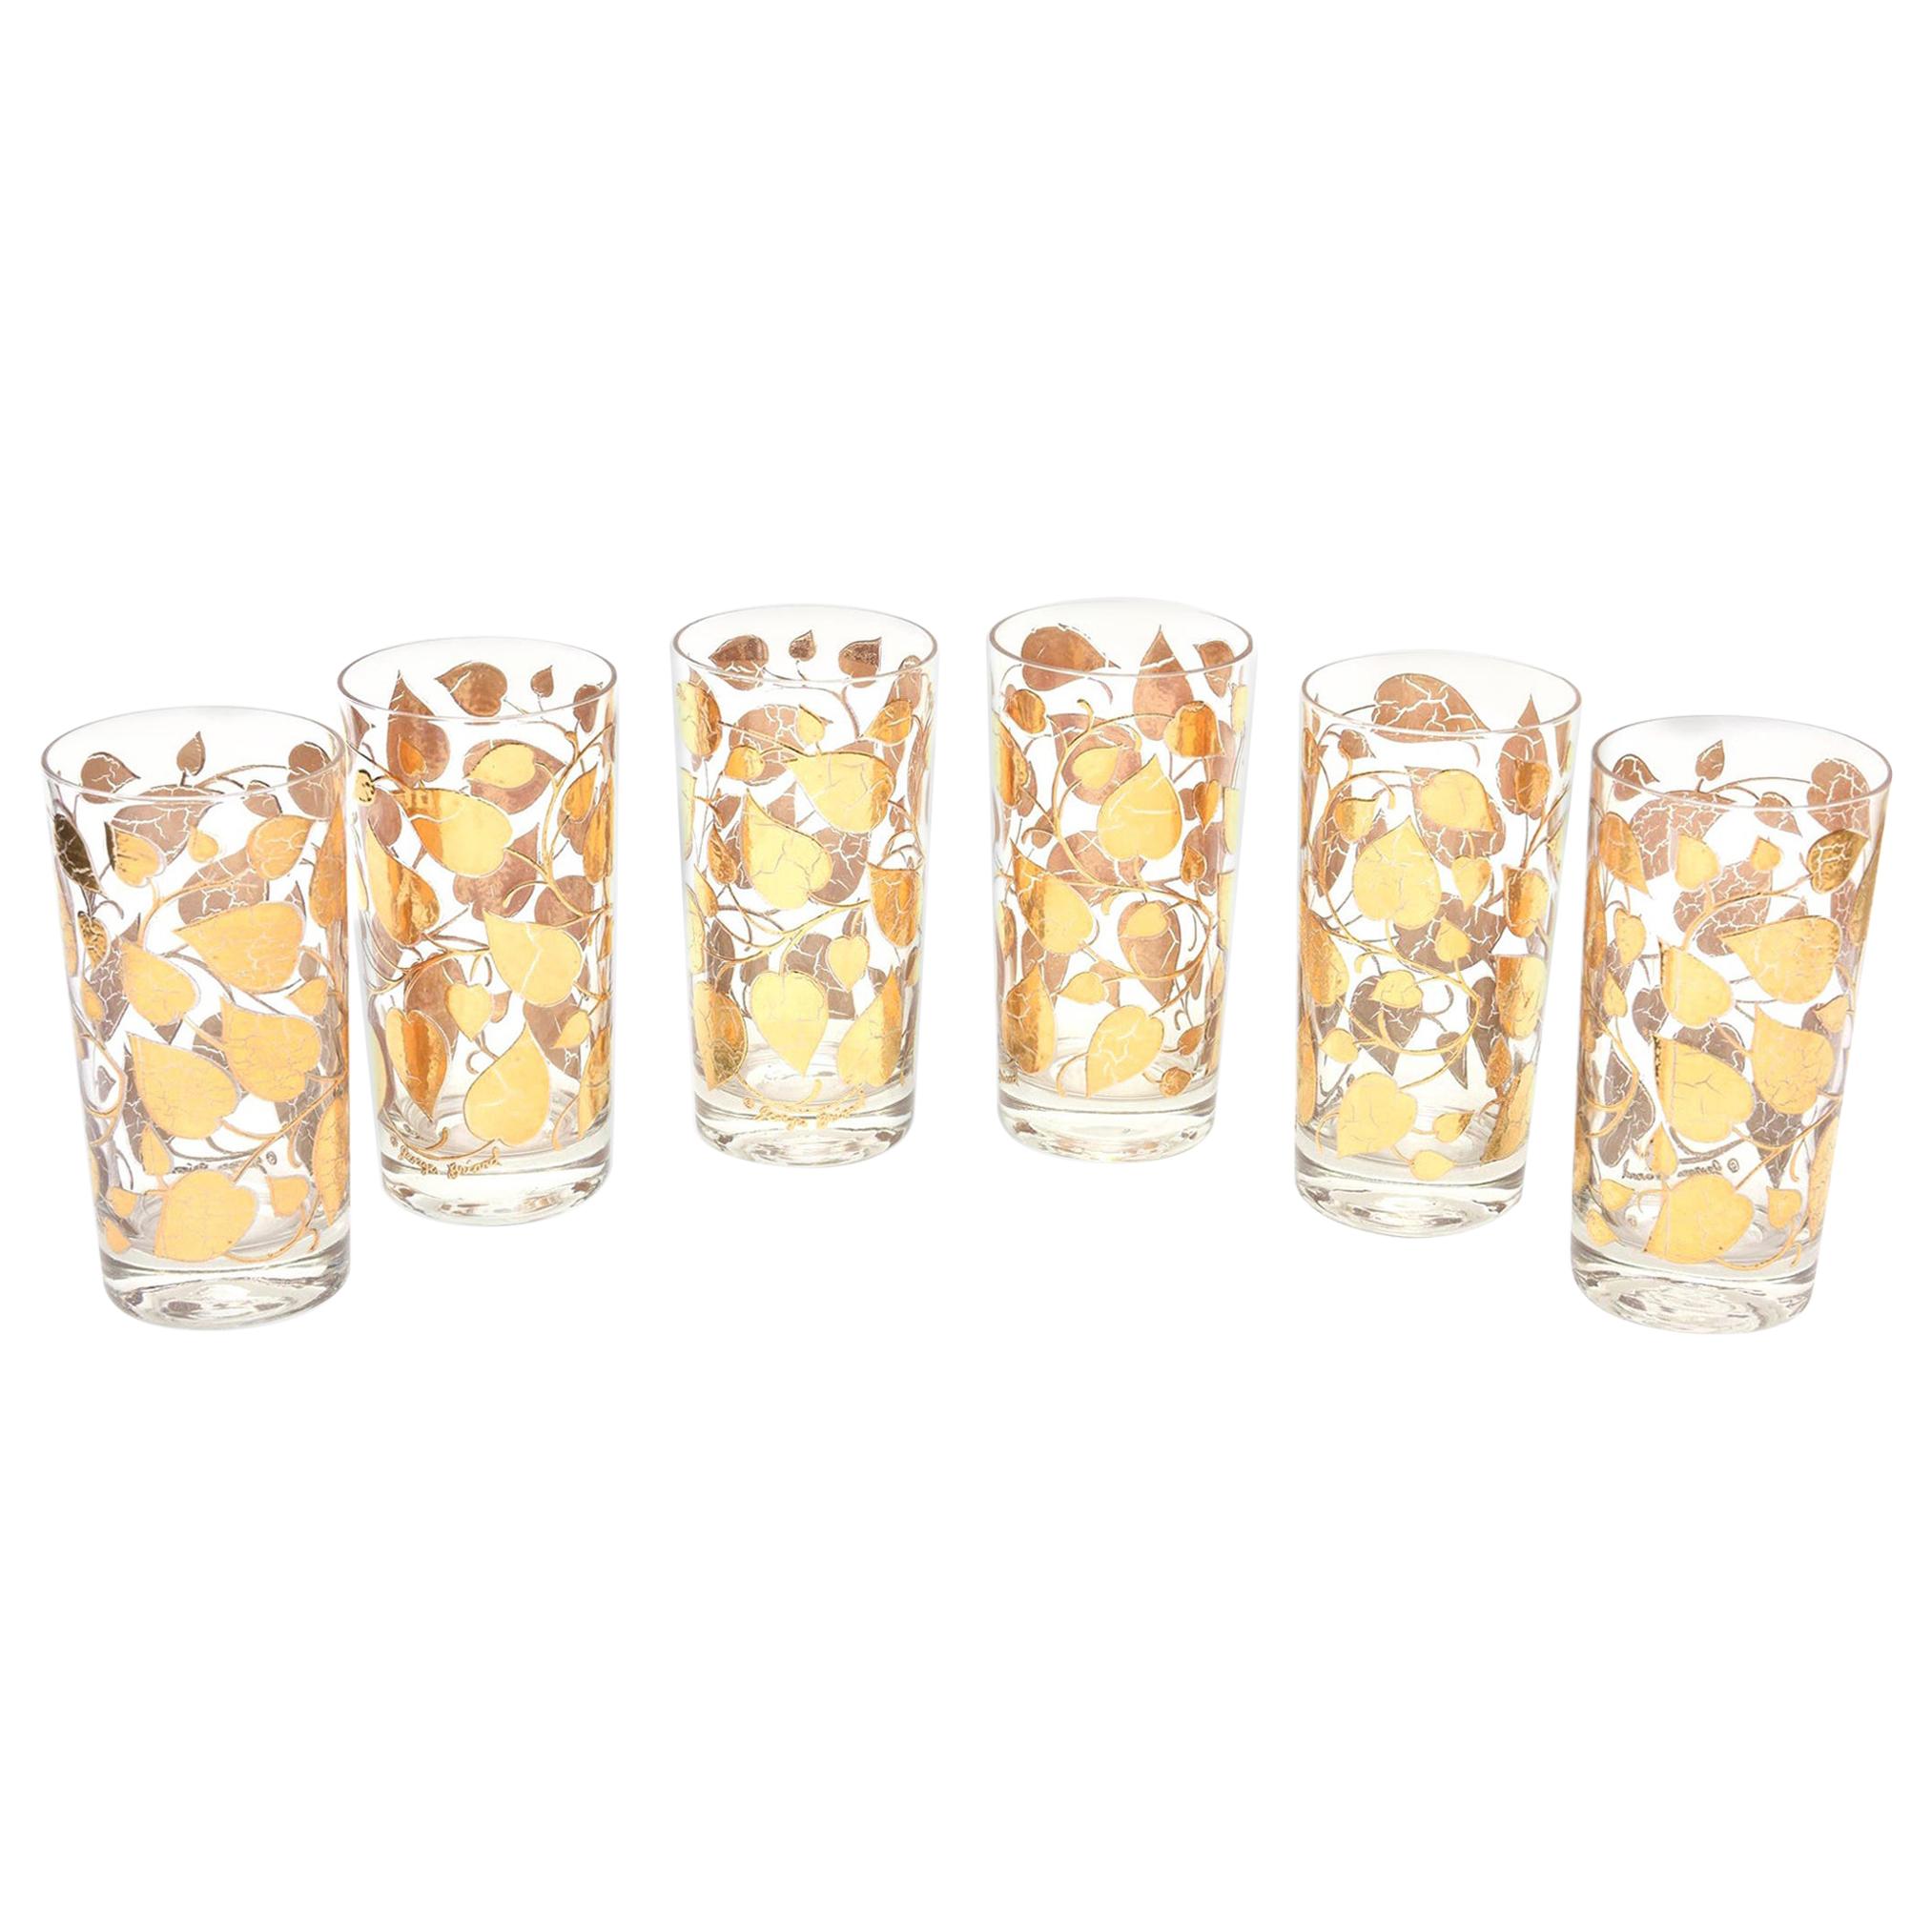 Georges Briard Gold and Clear Glass Highballs Mid Century Modern Barware